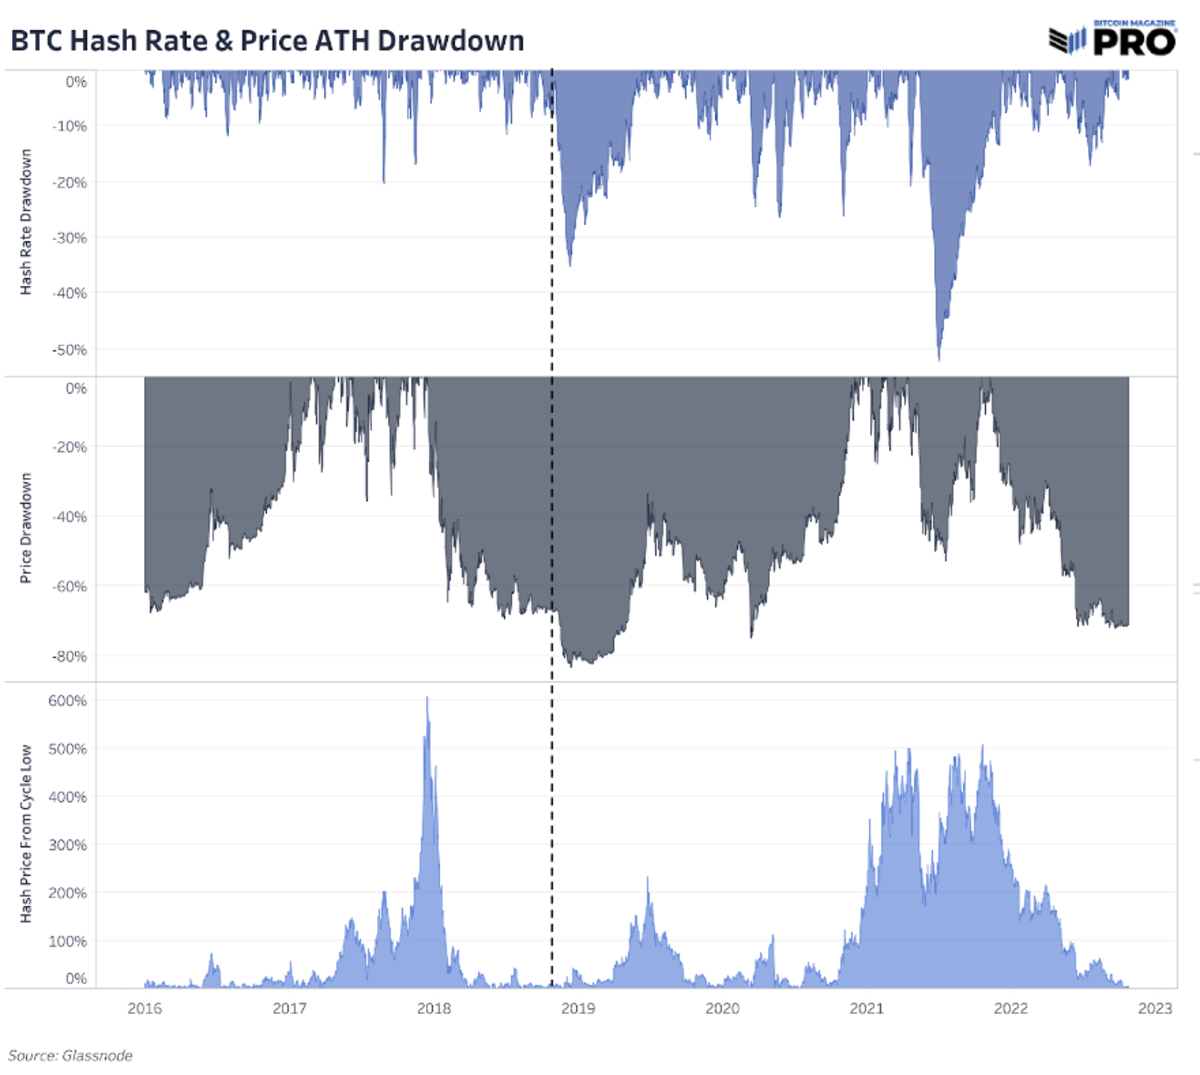 The bitcoin mining industry is under pressure as hash price reaches new lows, hash rate hits new all-time highs and the difficulty adjustment keeps going up.